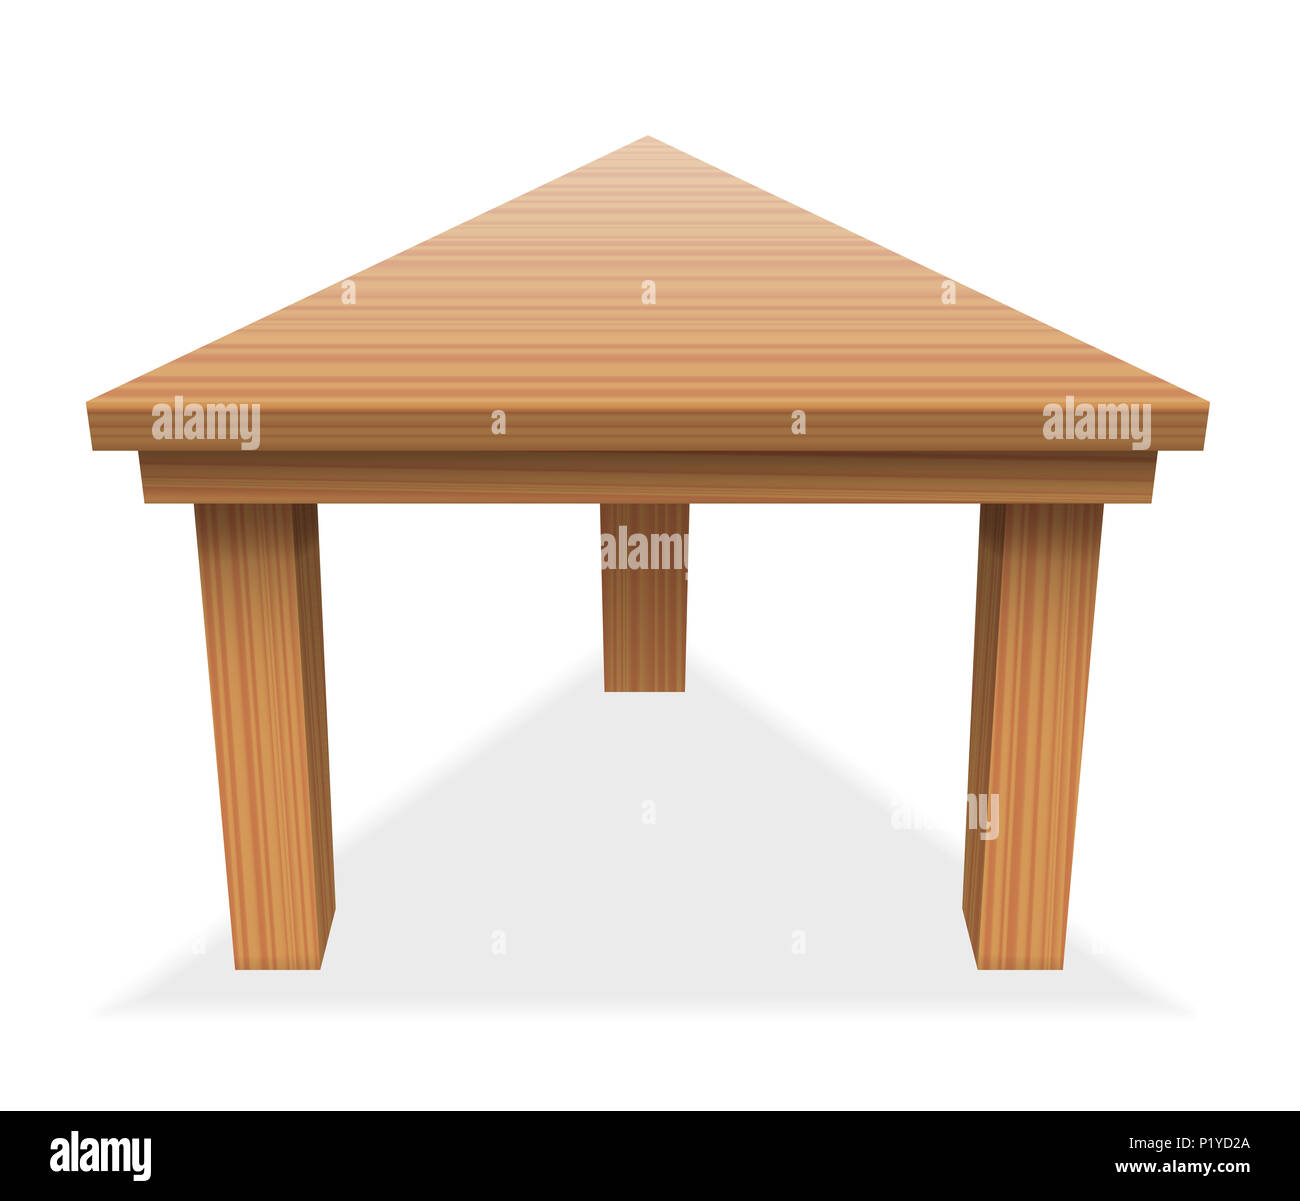 Triangular table - perspective view from above of wooden tabletop -  illustration on white background. Stock Photo